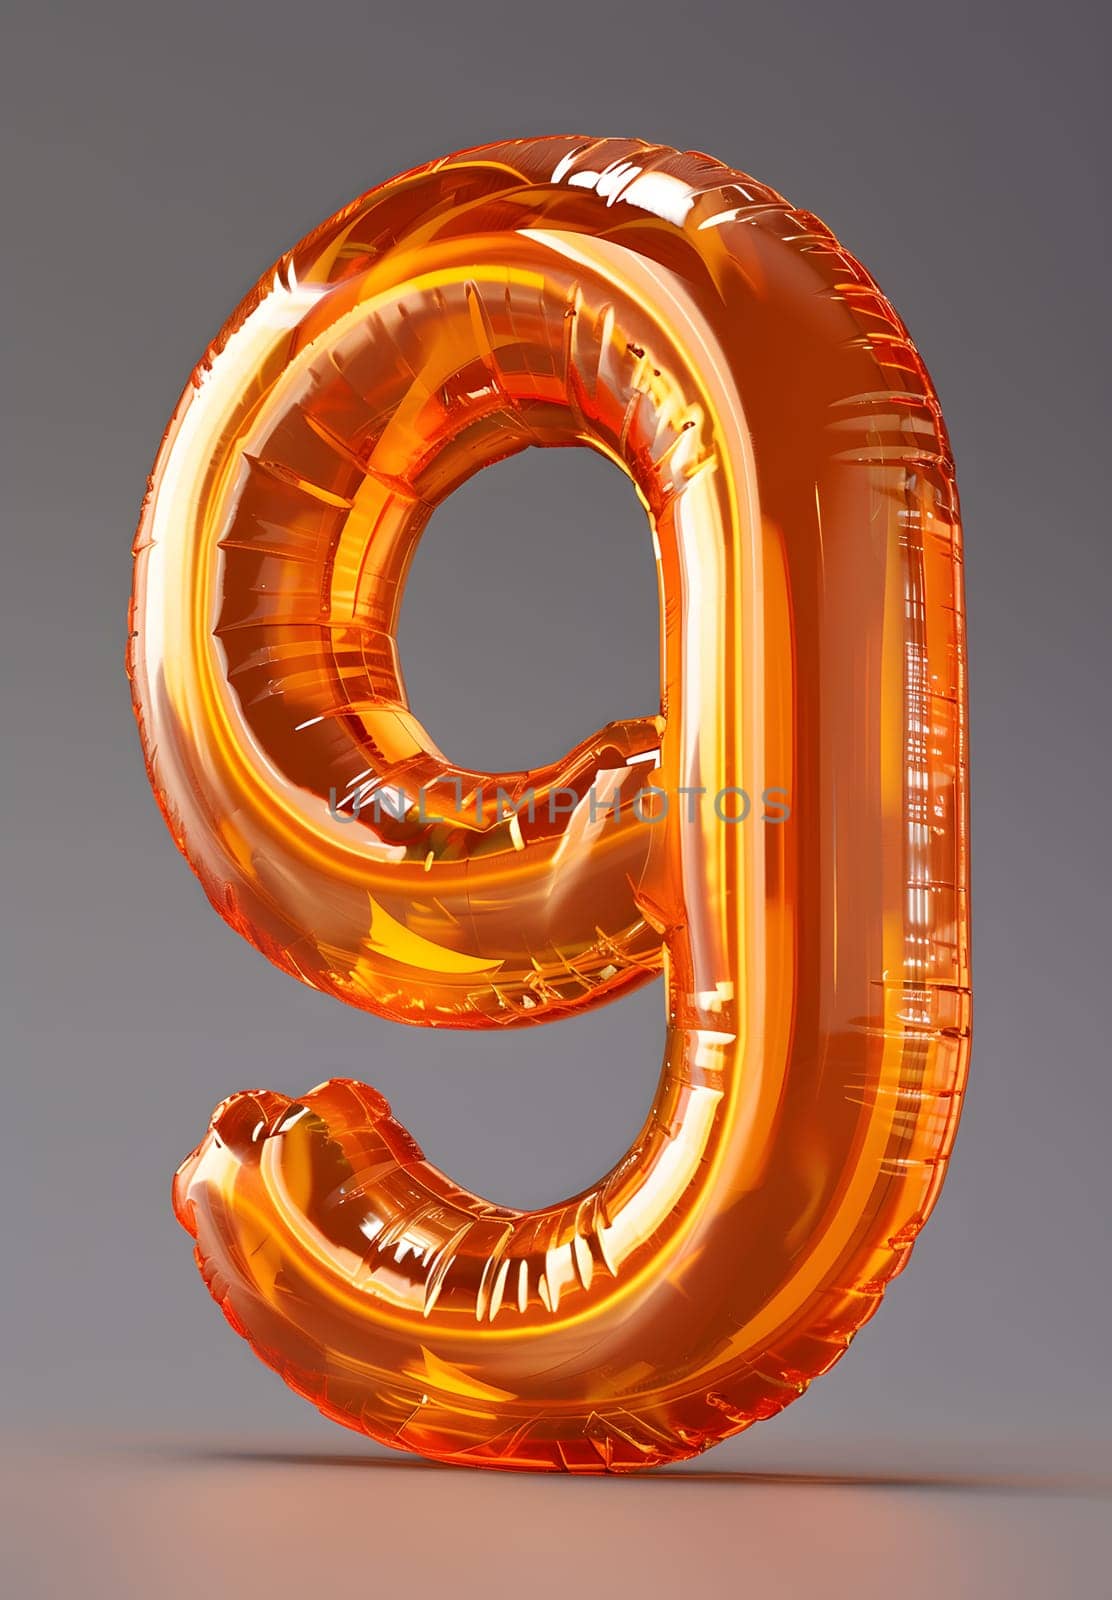 The number 9 is depicted as amber and gold balloons against a gray background. The design combines elements of art, automotive tire rim, circle, metal, electric blue, and jewellery